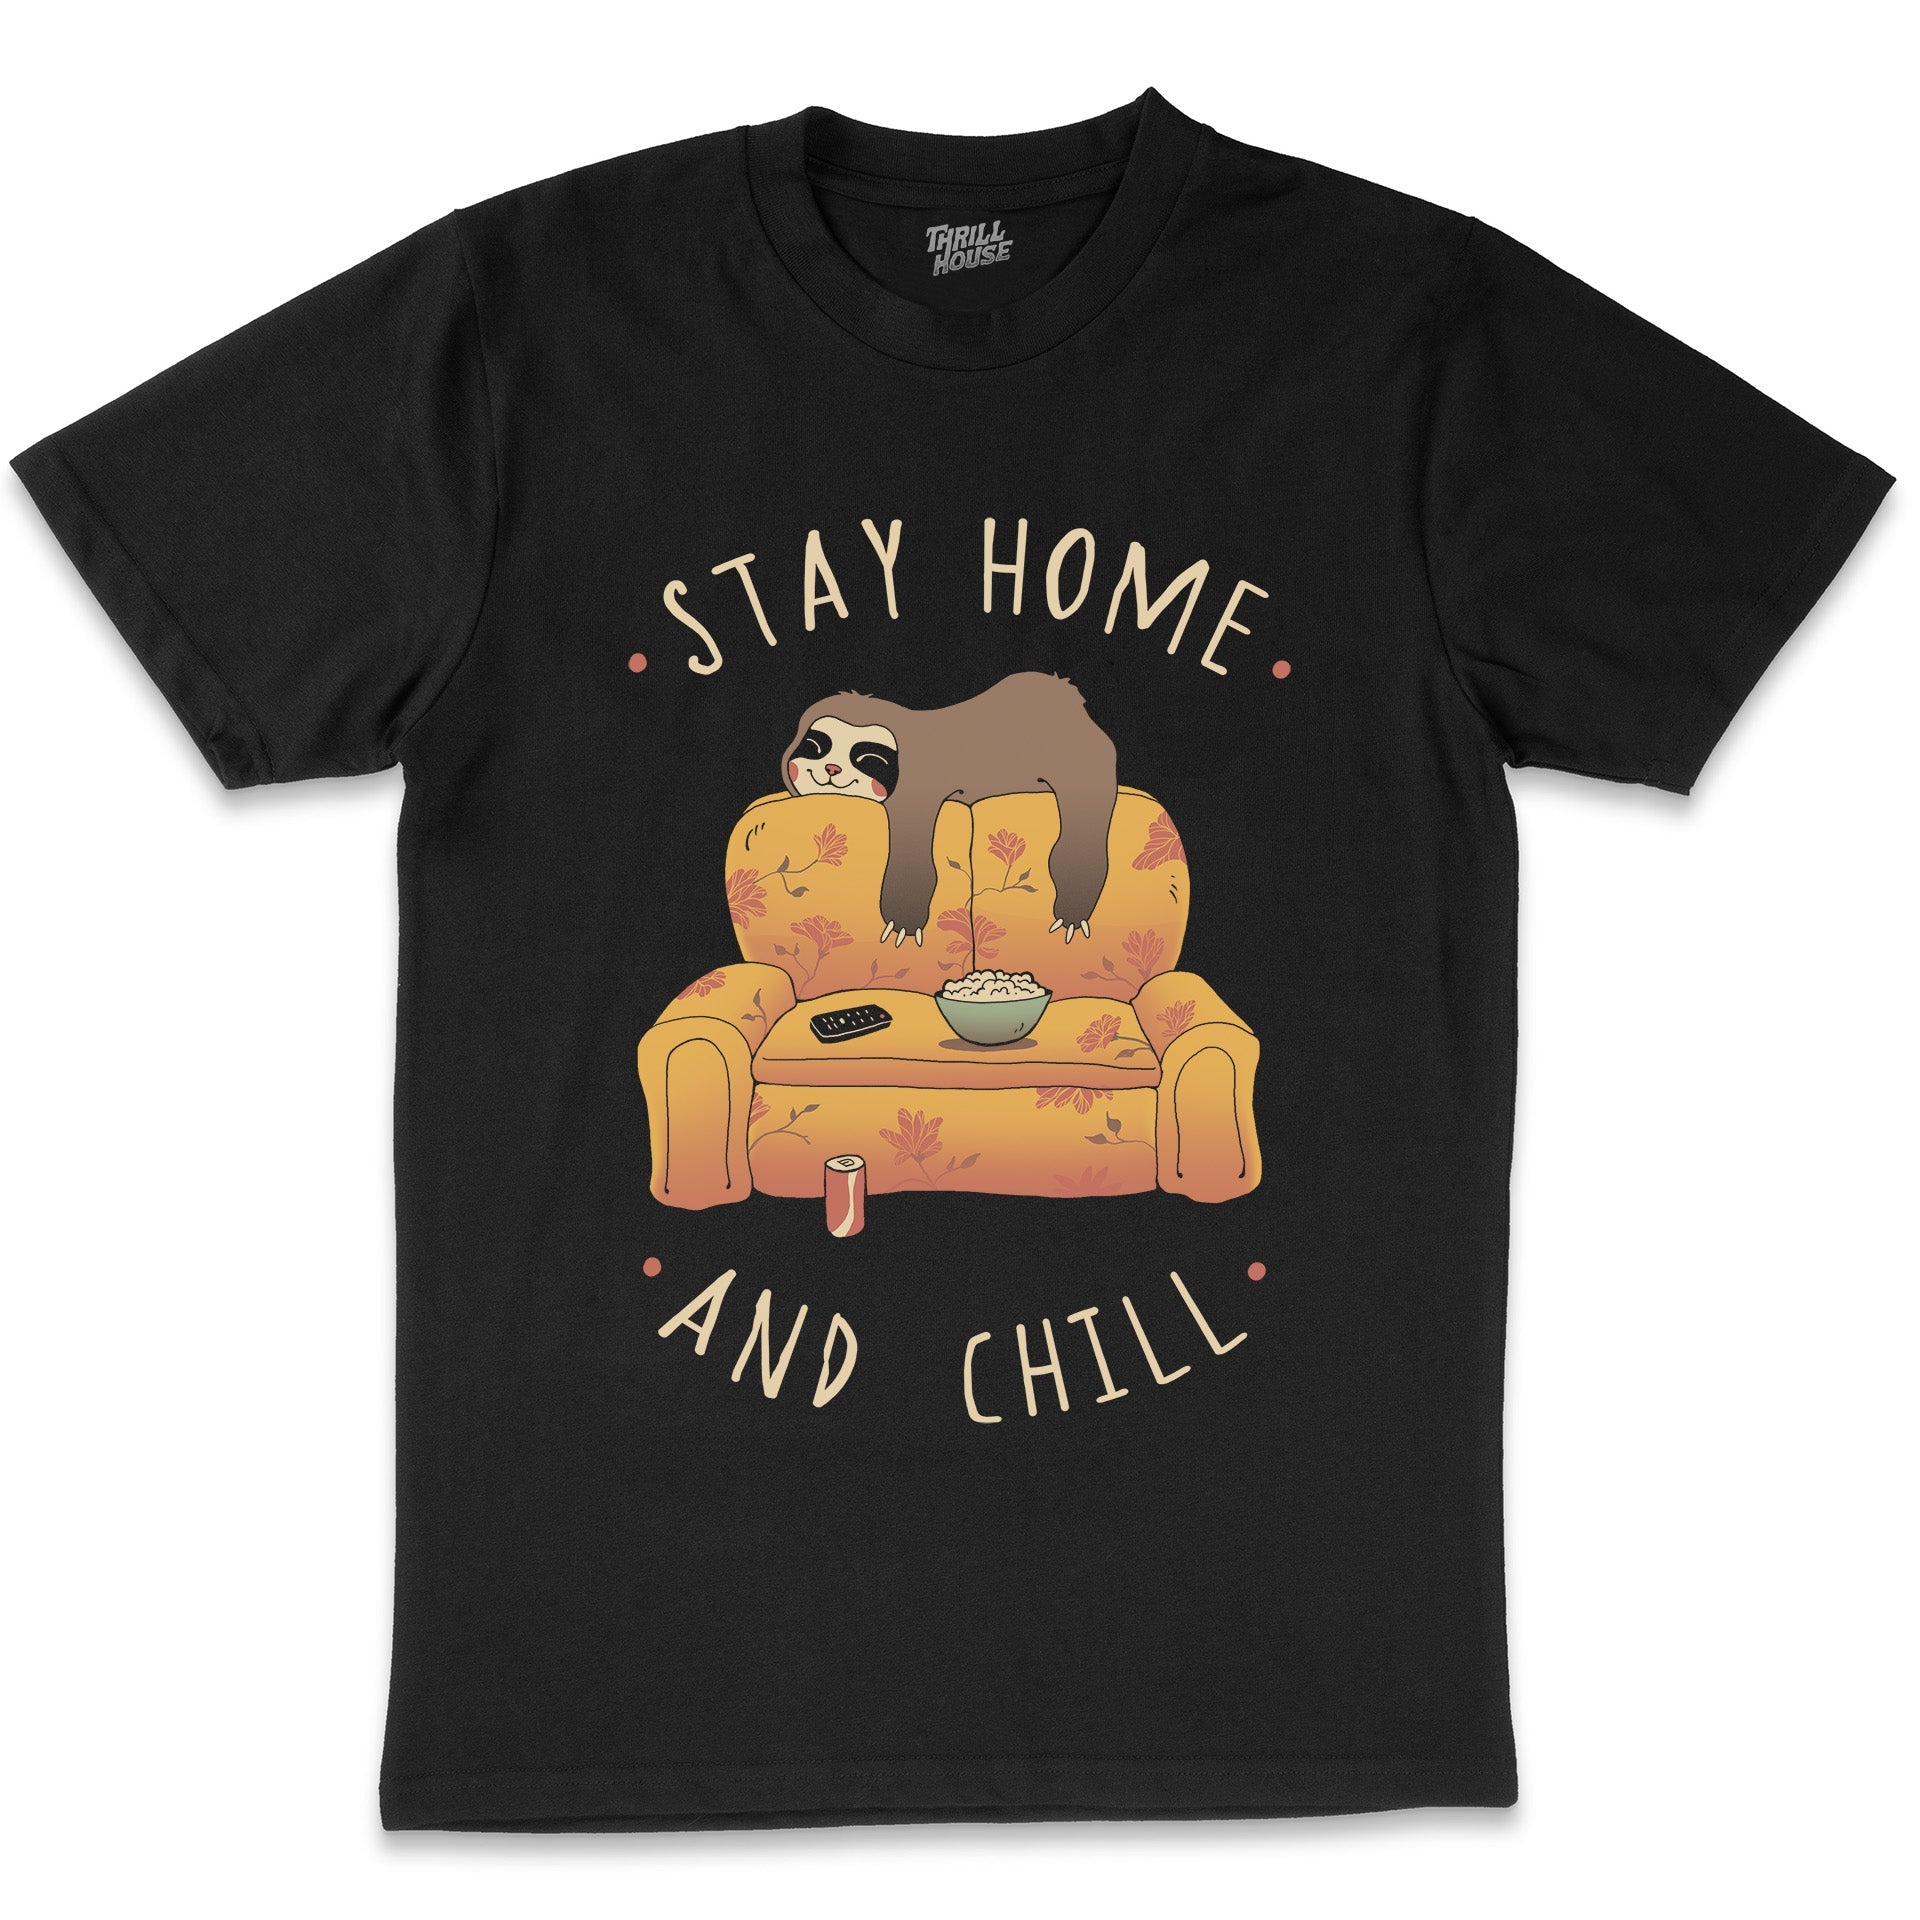 Stay at Home and Chill Funny Lazy Sloth Animal Slogan Sleep Tired Cotton T-Shirt